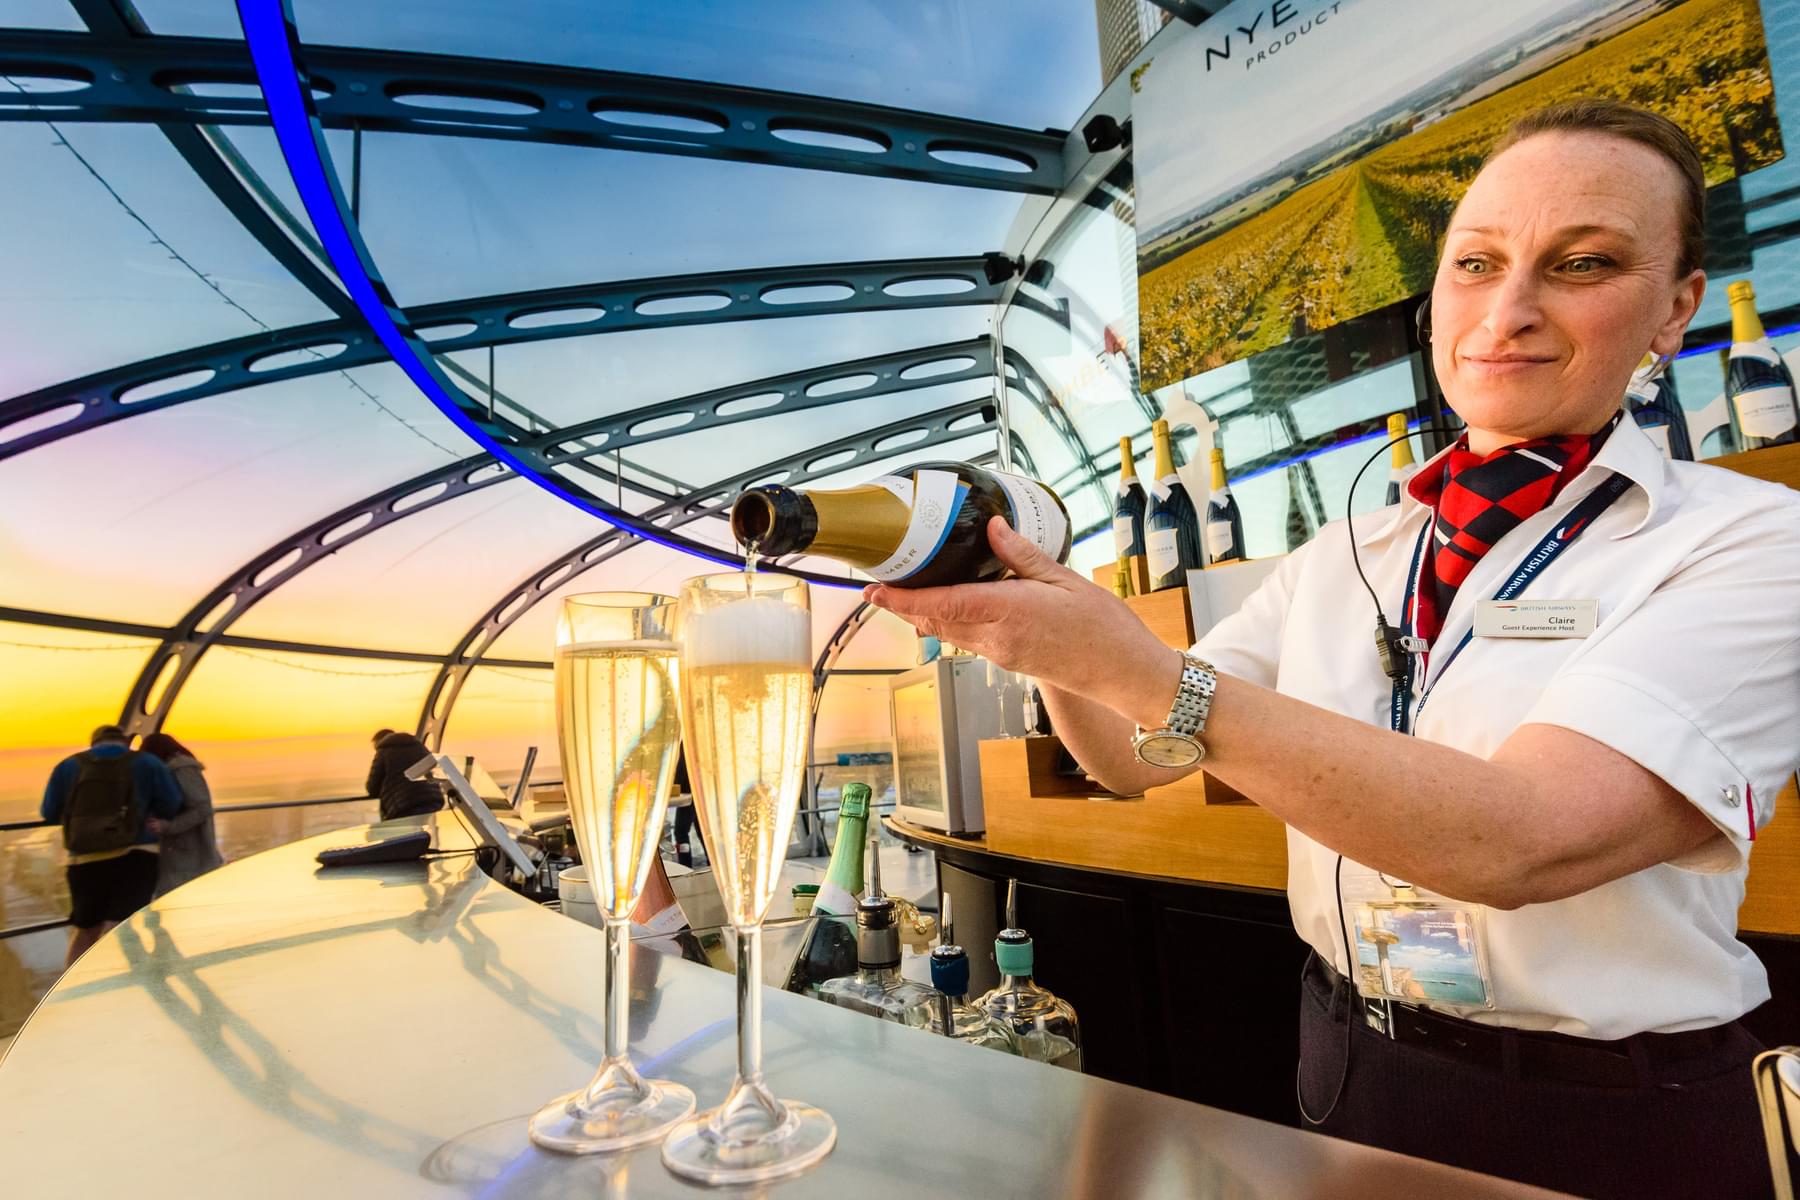 Relish a glass of sparkling wine while taking in the splendid views of the city